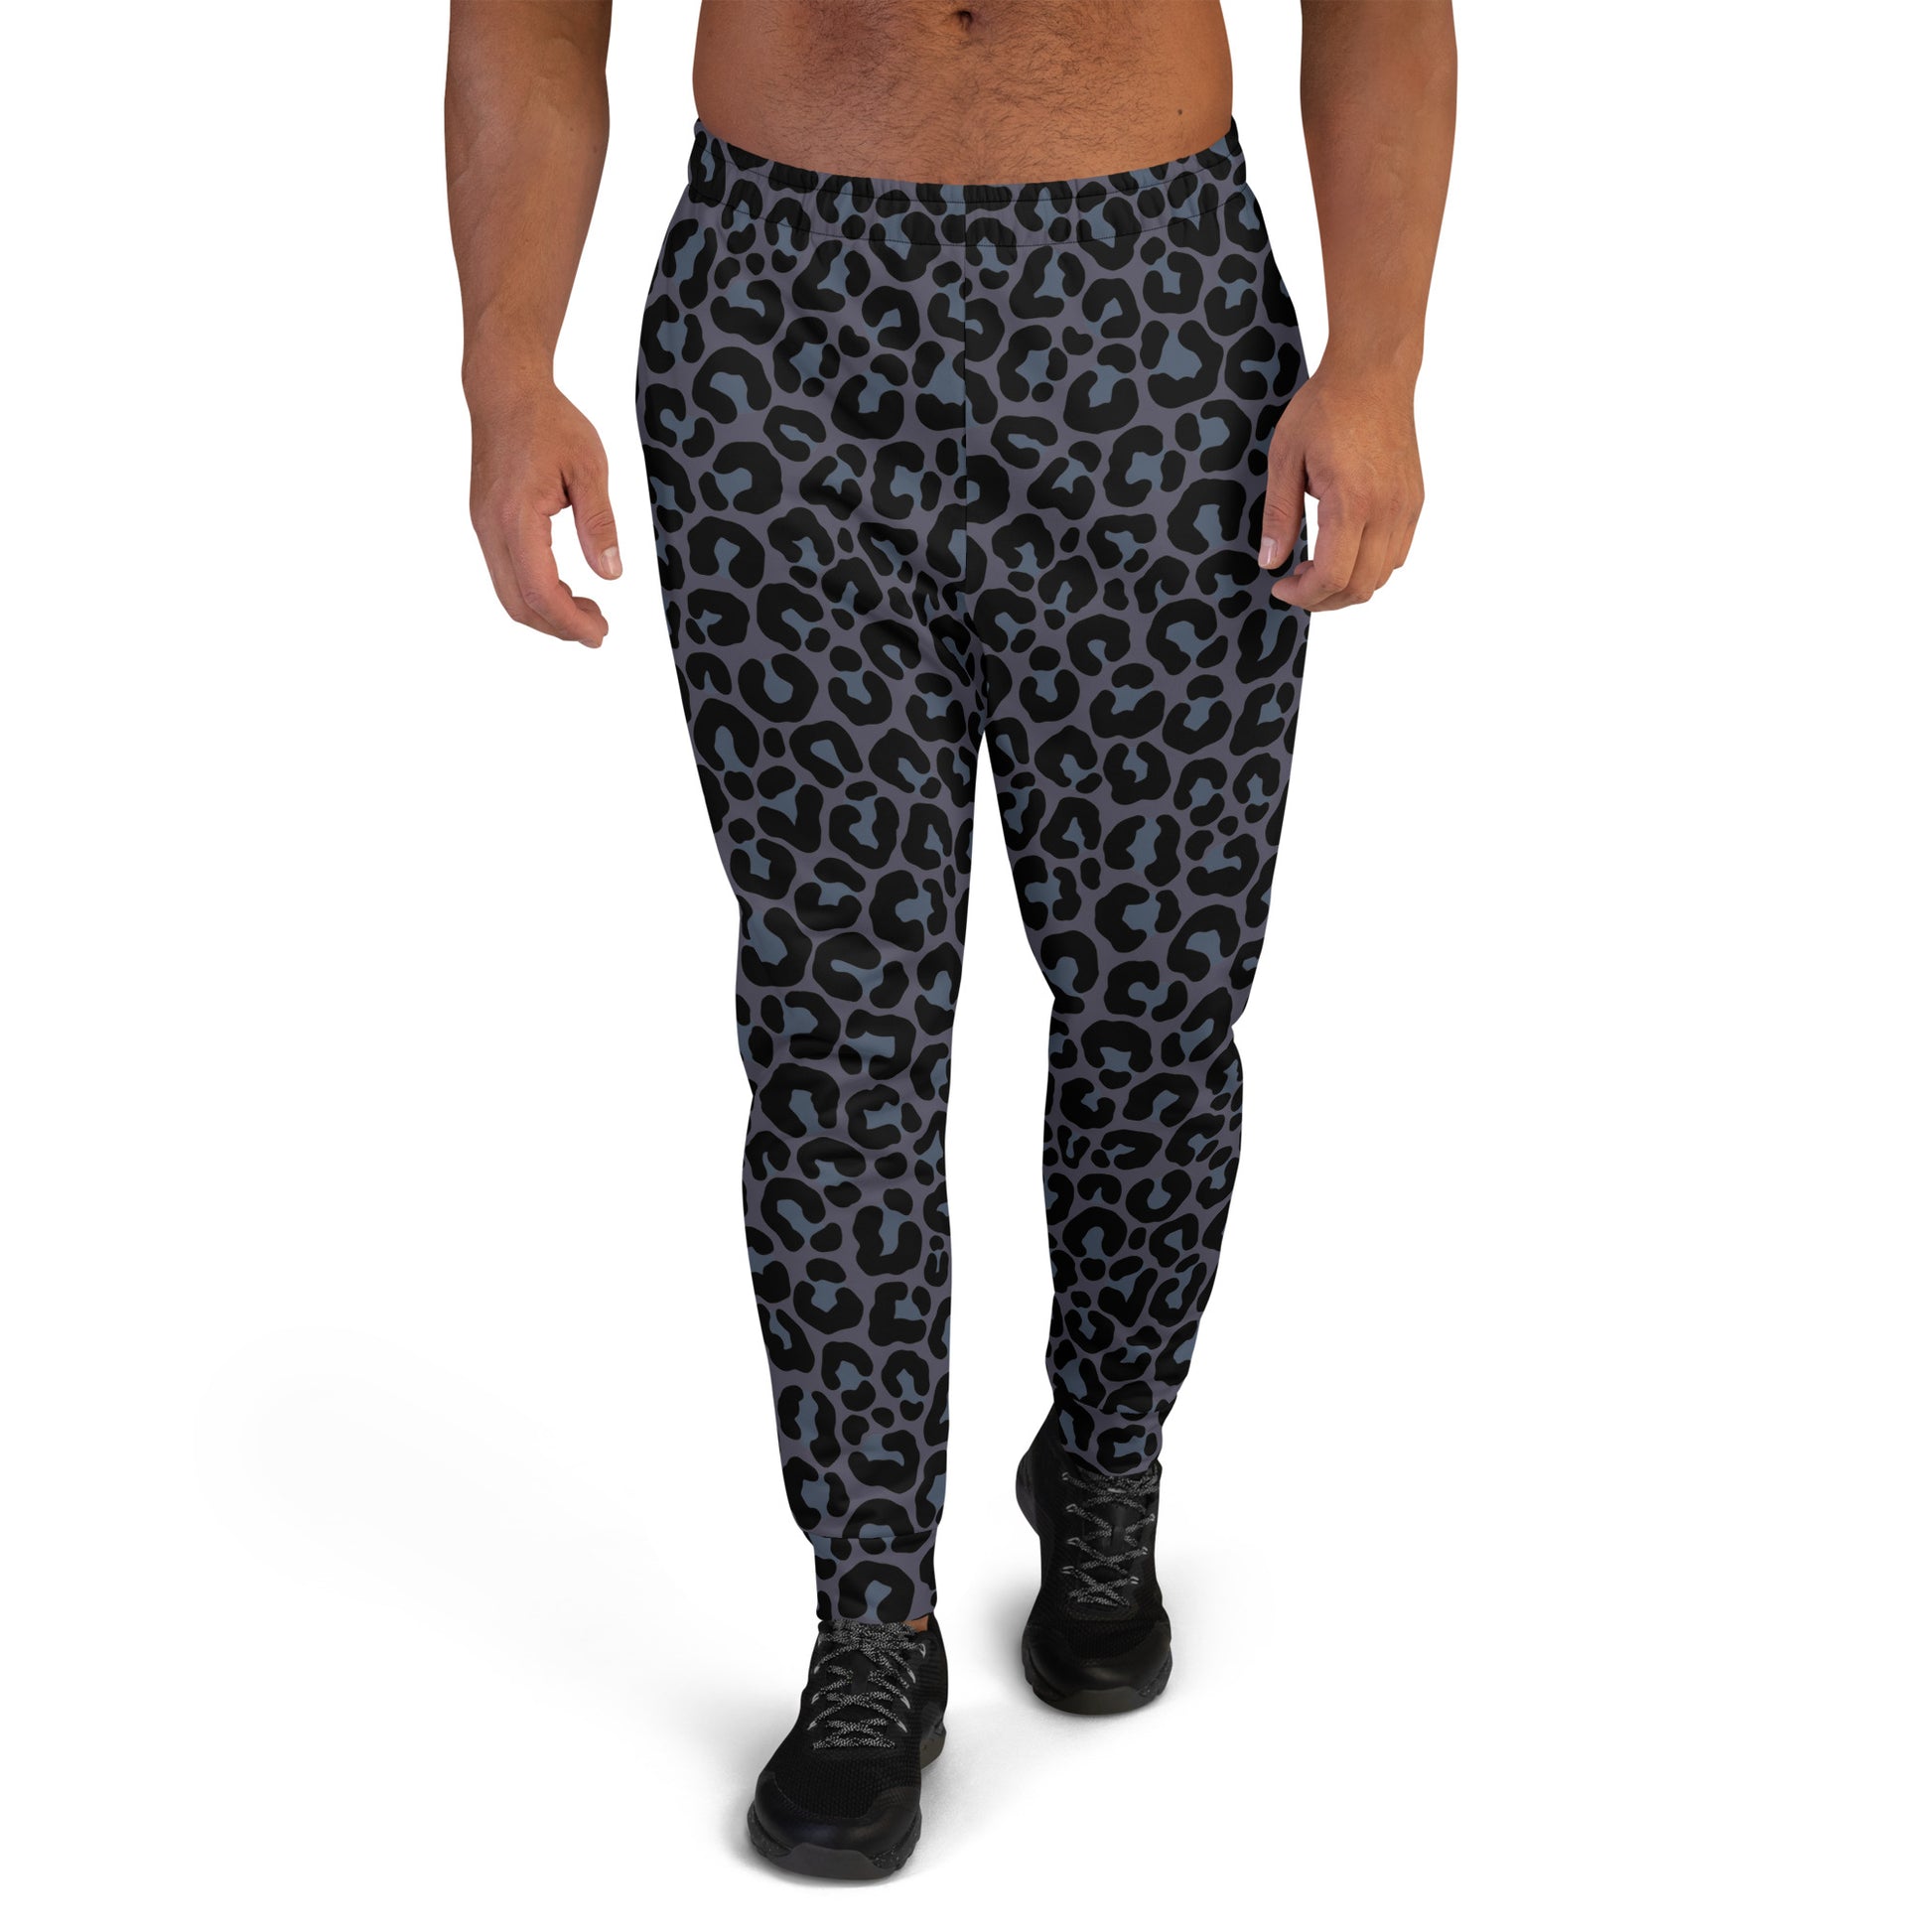 All Black Leopard Men Joggers Sweatpants with Pockets, Animal